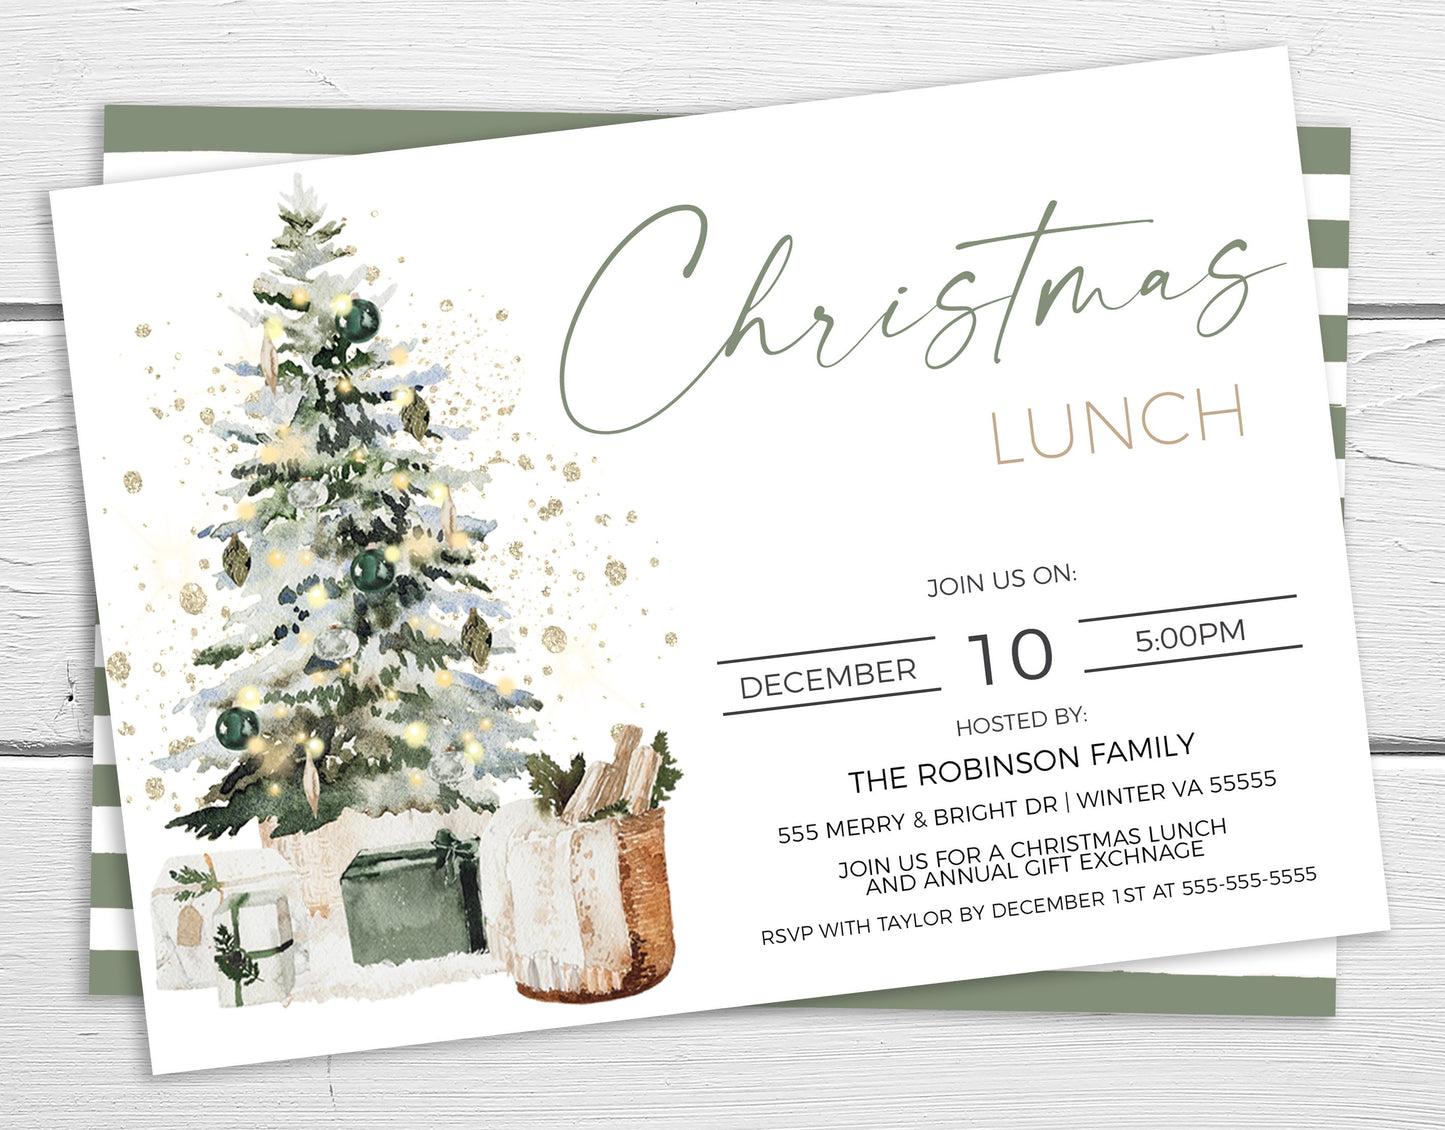 Editable Christmas Lunch Party Invitation, Brunch Luncheon Dinner Winter Holiday Invite, Business Company Staff Employee, Printable